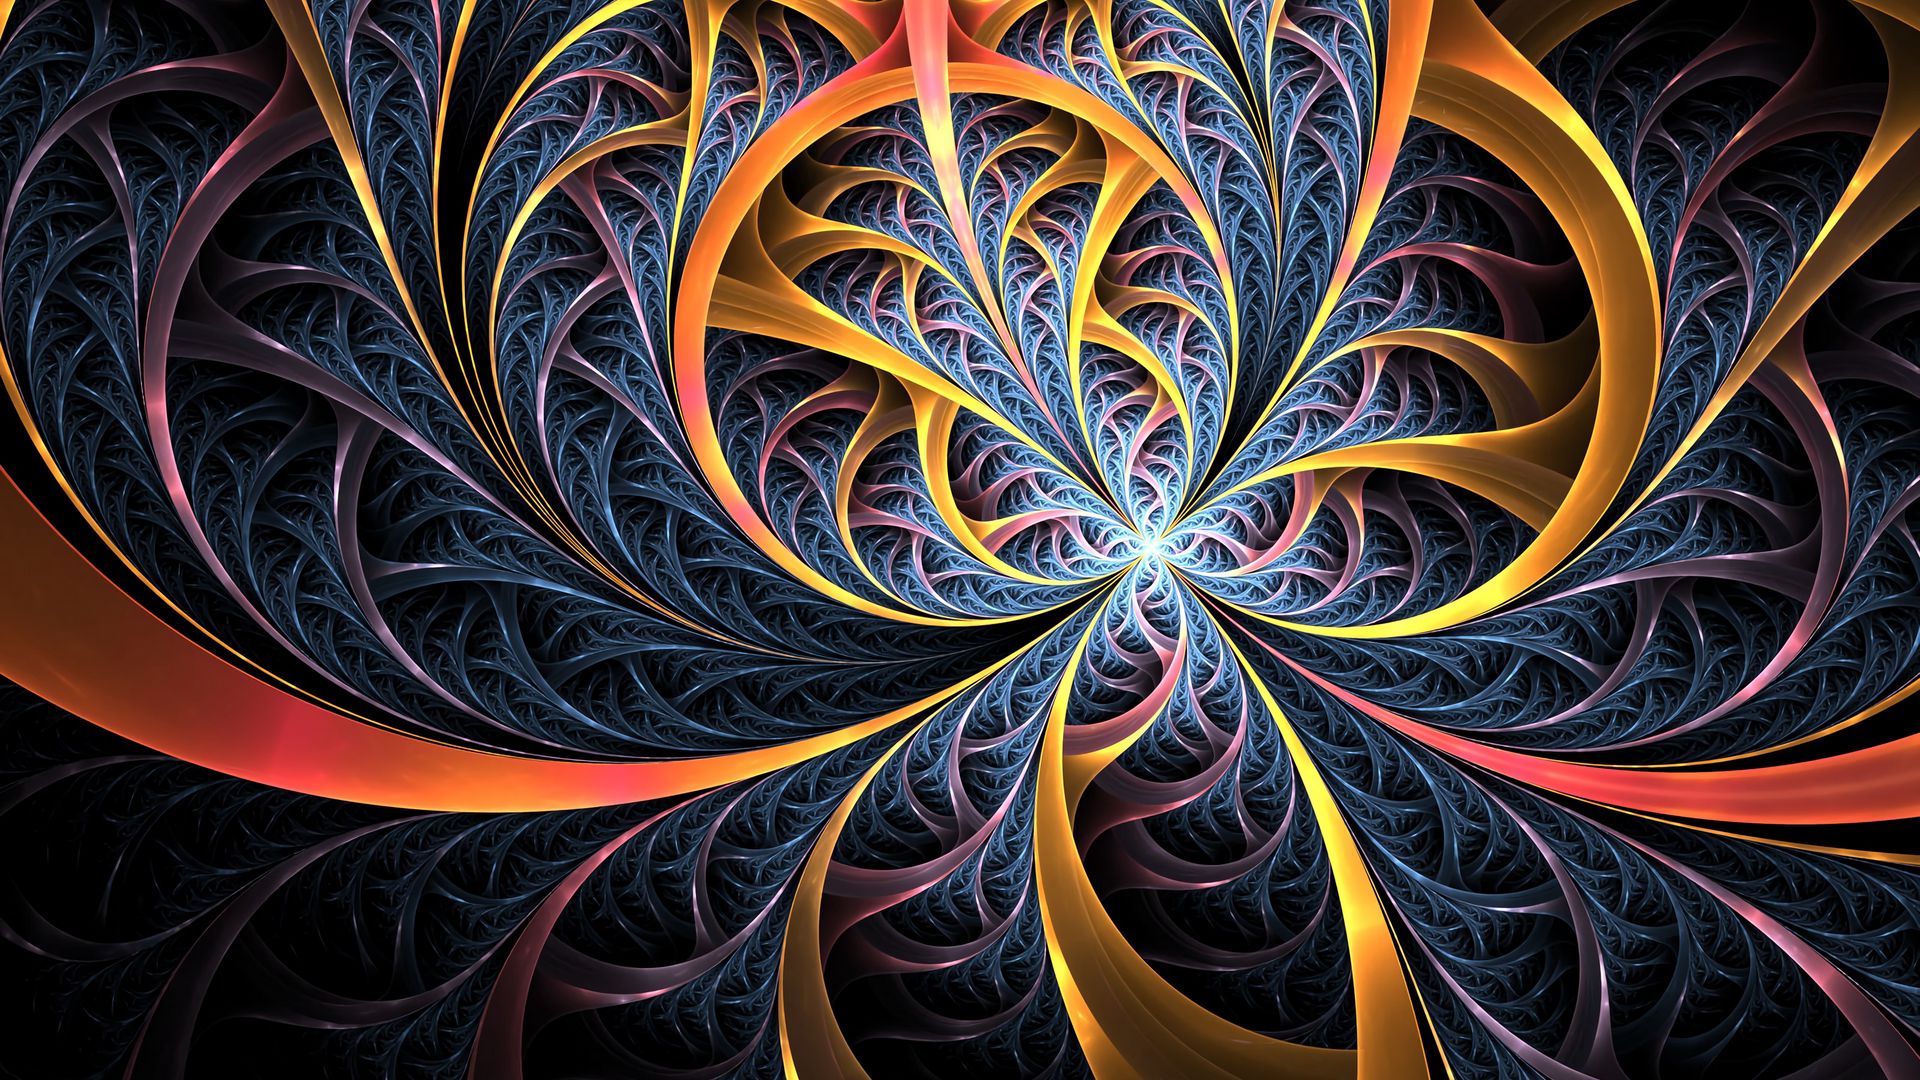 548471 Backgrounds High Resolution fractal pic  fractal category  Rare  Gallery HD Wallpapers